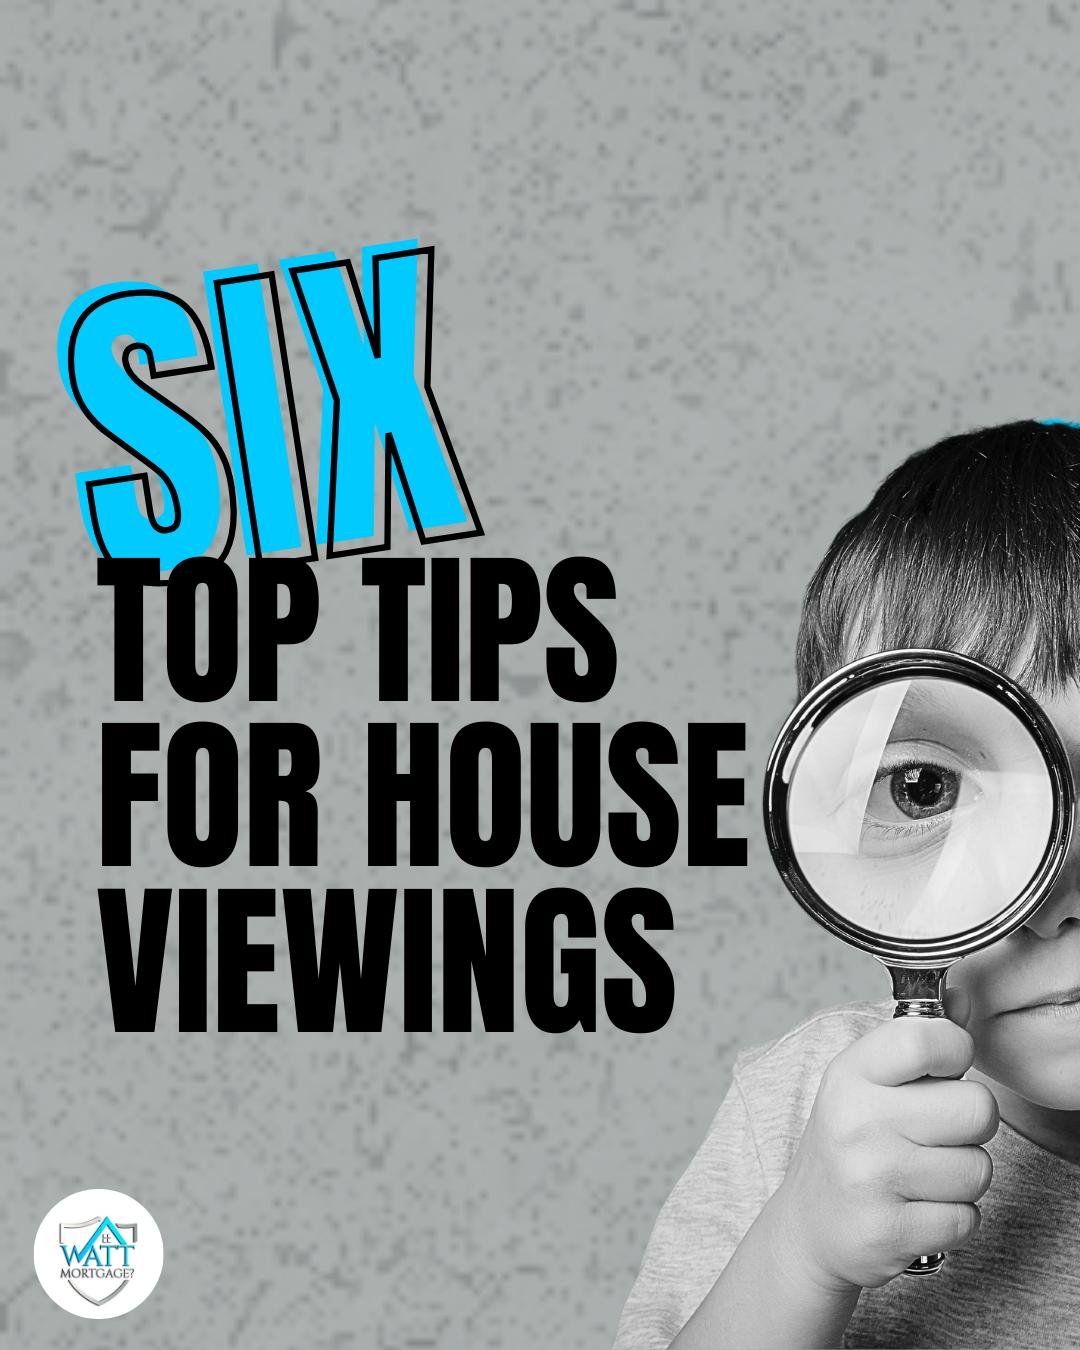 6 top tips for house viewings 🏘

Knowing where to start when viewing a property can be daunting, so let's look at our top tips!

🔍View the property more than once - Aim to view any potential property more than once. Ideally, in the daytime and then